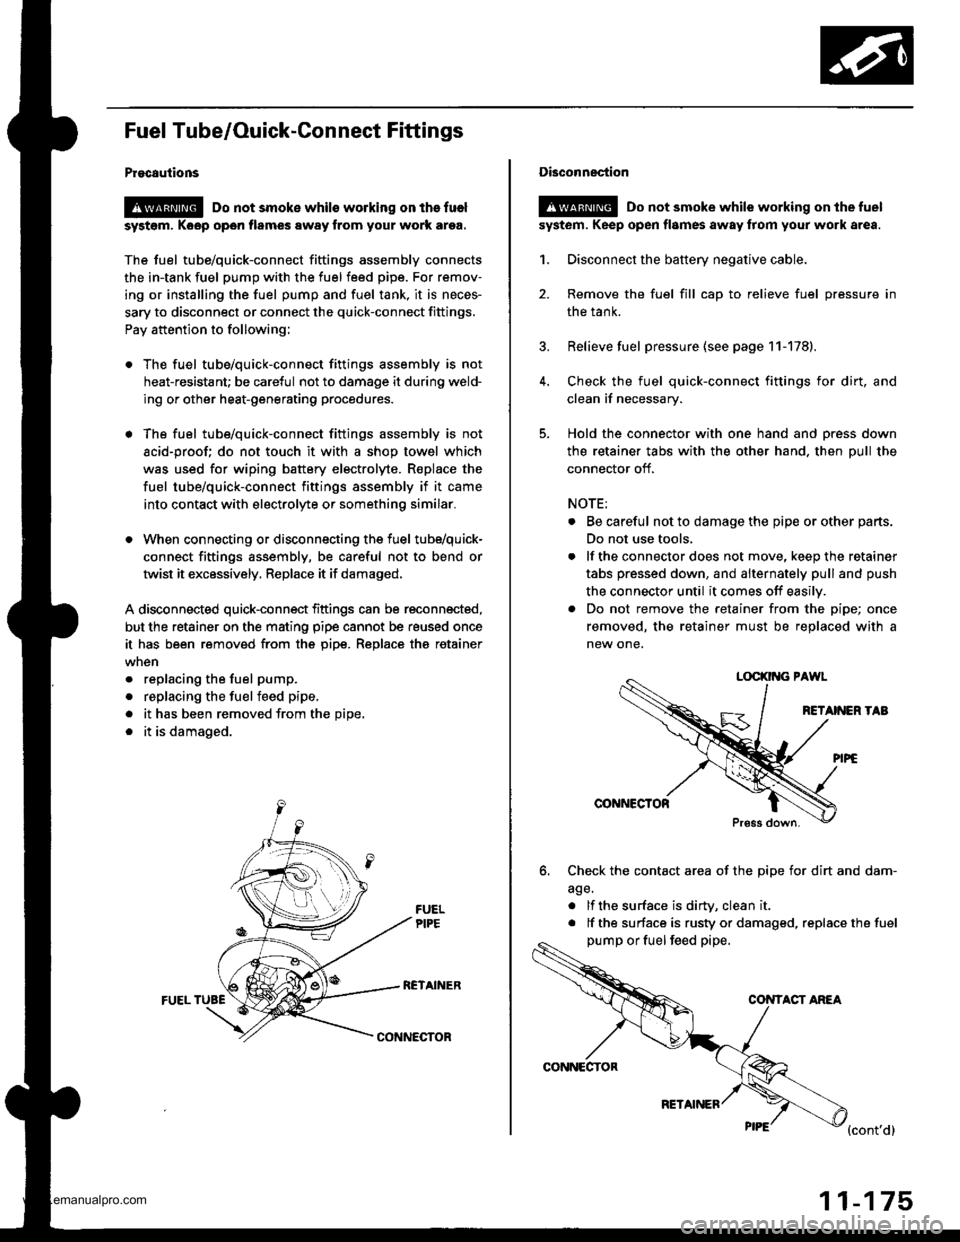 HONDA CR-V 1998 RD1-RD3 / 1.G Service Manual 
Fuel Tube/Ouick-Gonnect Fittings
Procautions
@ Do not smoke whils working on the fuel
syst6m, Koop open flames away from your work ar9a.
The fuel tube/quick-connect fittings assembly connects
the in-